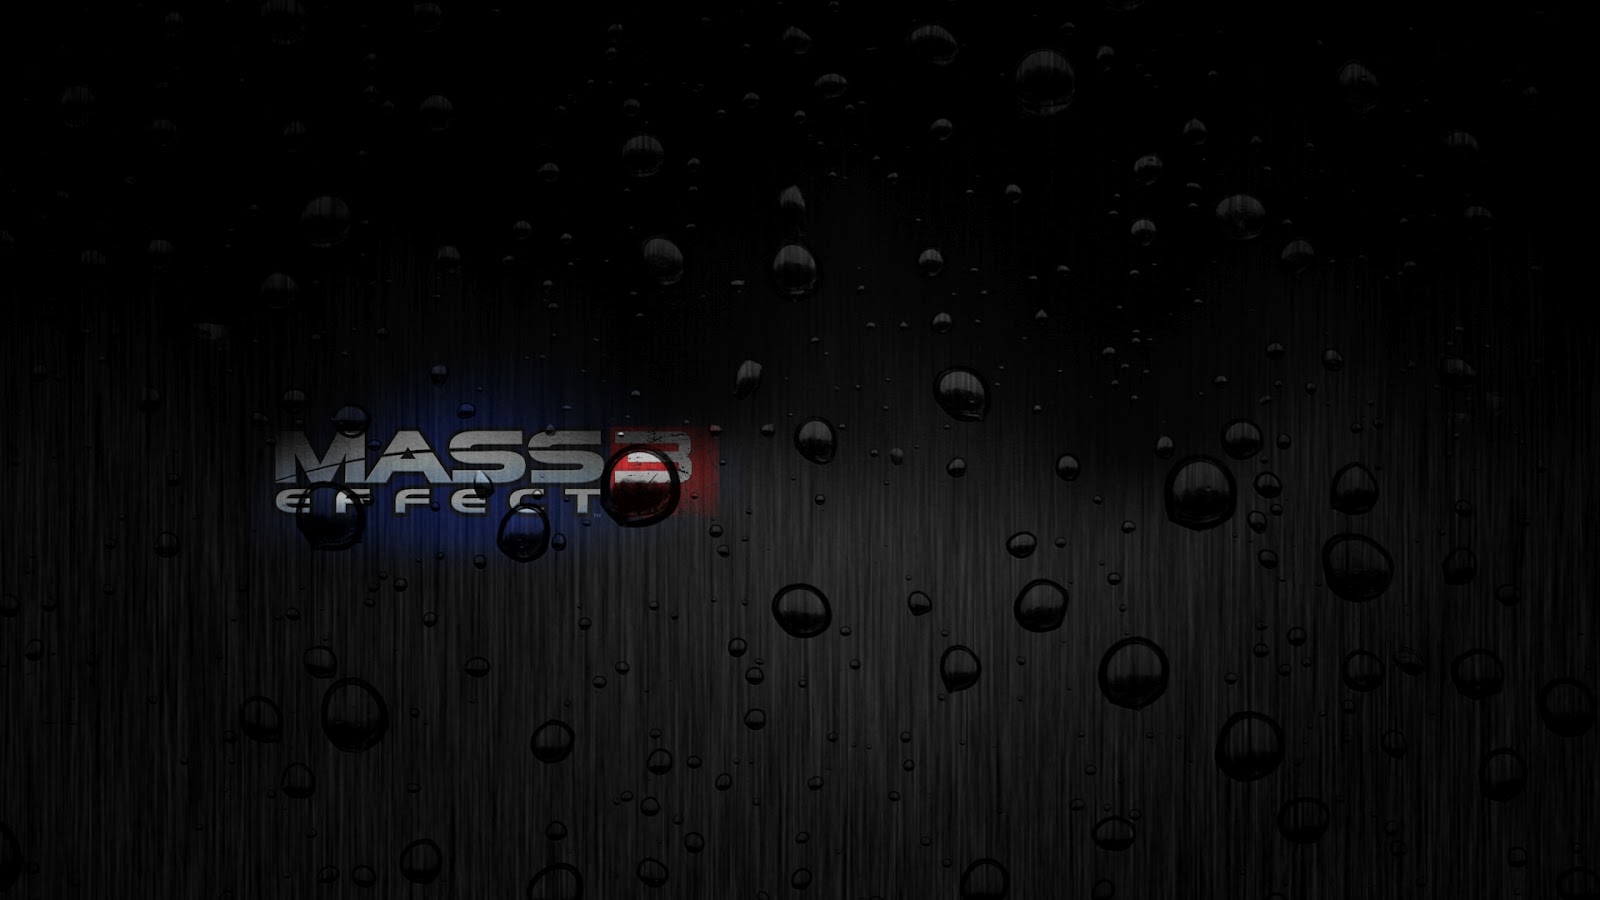 Free Download Beauty Re Rendered Mass Effect 3 Wallpaper 1600x900 For Your Desktop Mobile Tablet Explore 49 Mass Effect 3 Wallpaper 19x1080 Mass Effect Desktop Wallpaper Mass Effect Tali